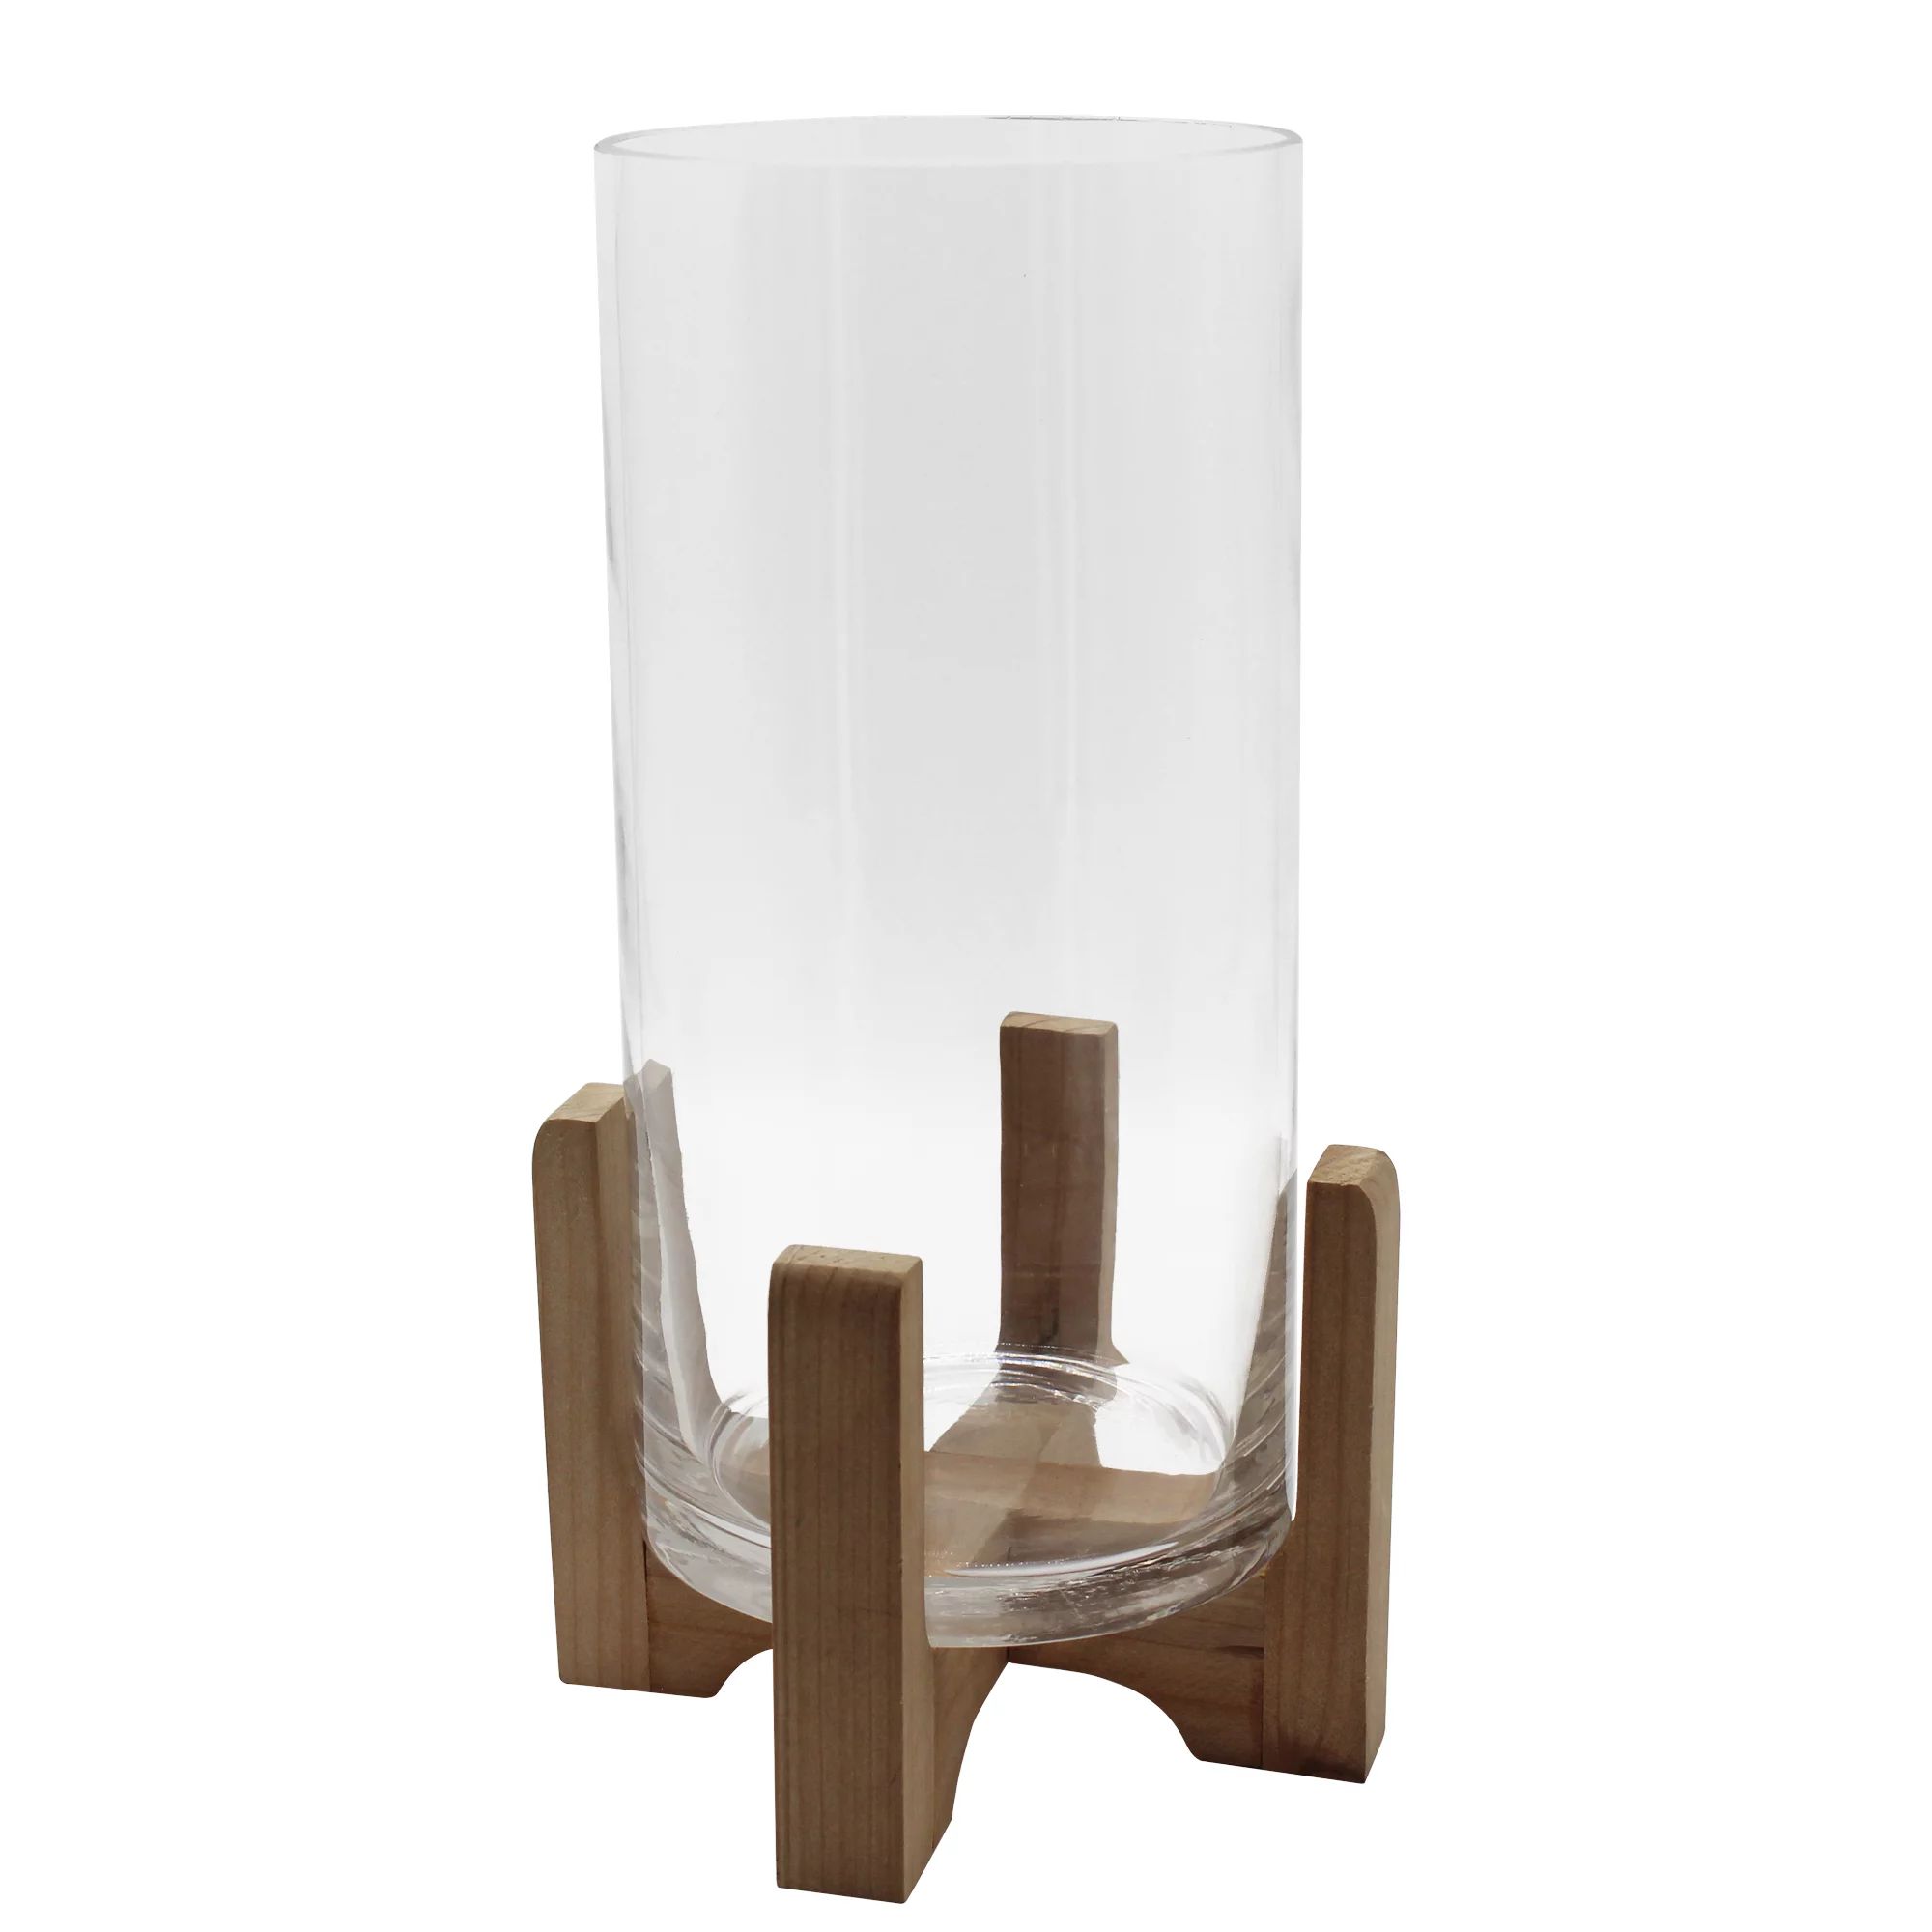 Better Homes & Gardens Glass Hurricane Candle Holder with Wood Stand | Walmart (US)